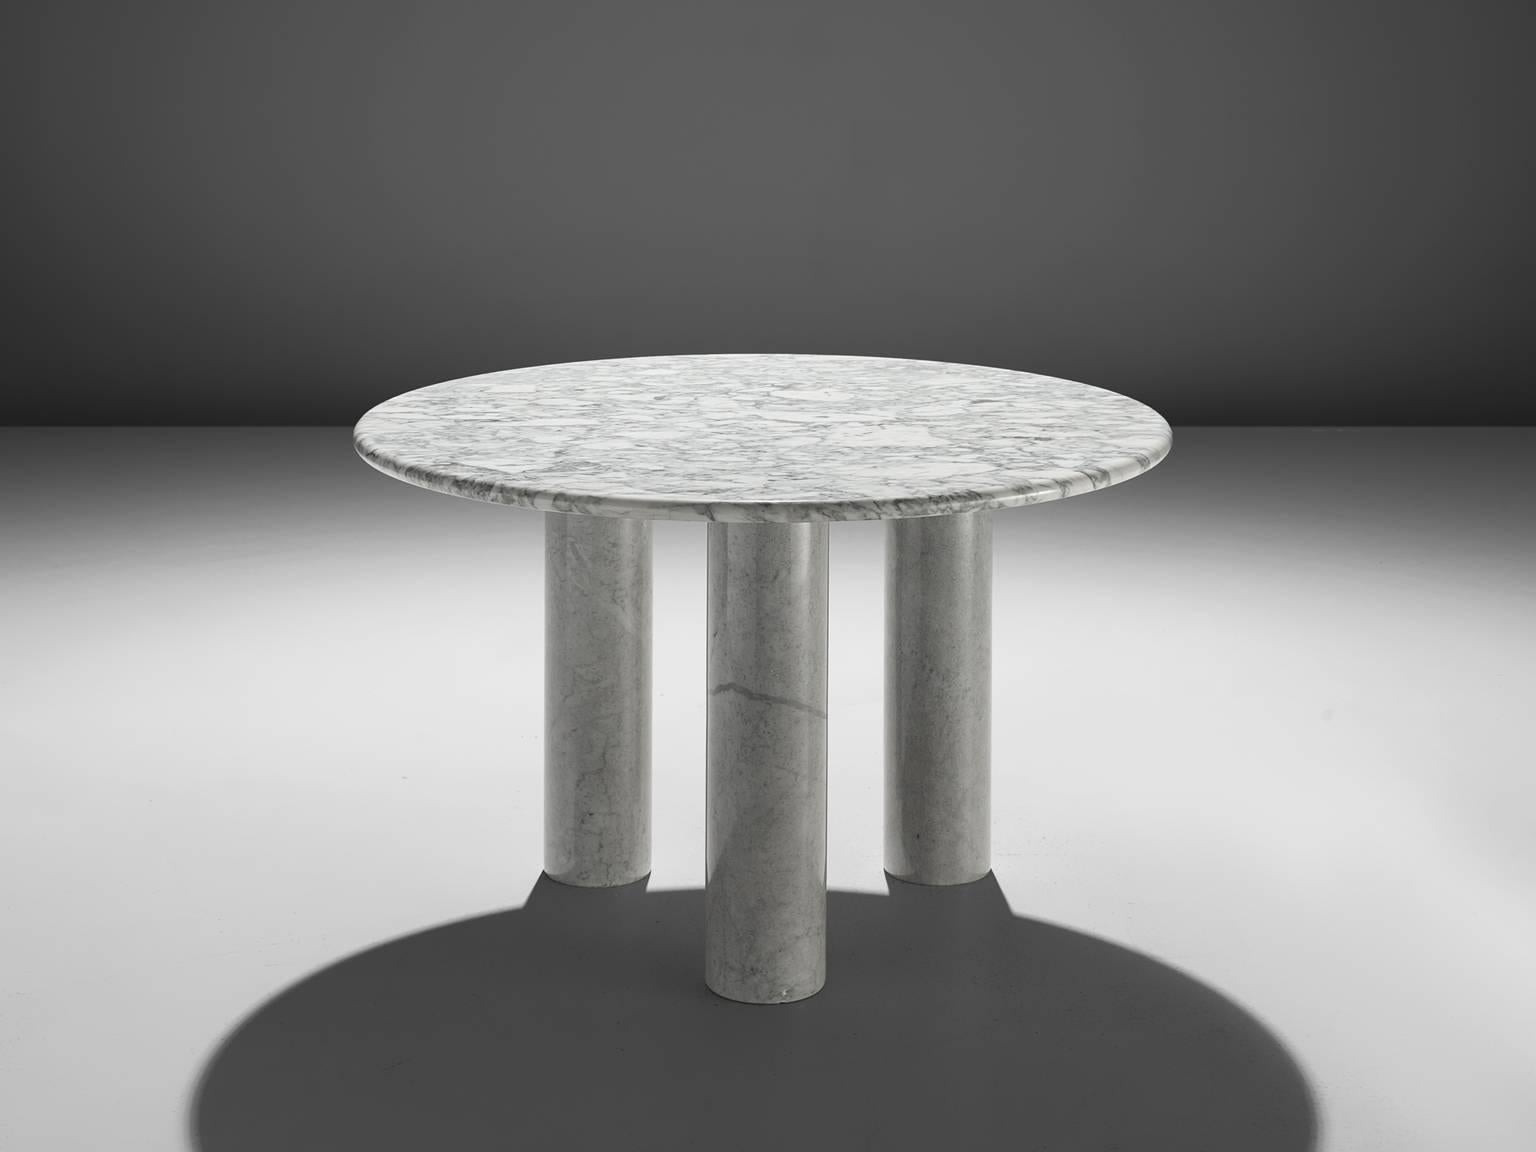 Breakfast table, marble, Italy, 1970s. 

This architectural table is a skillful example of postmodern design. The circular table features no joints or clamps and is architectural in its structure. The table rests on the three column-like legs. The